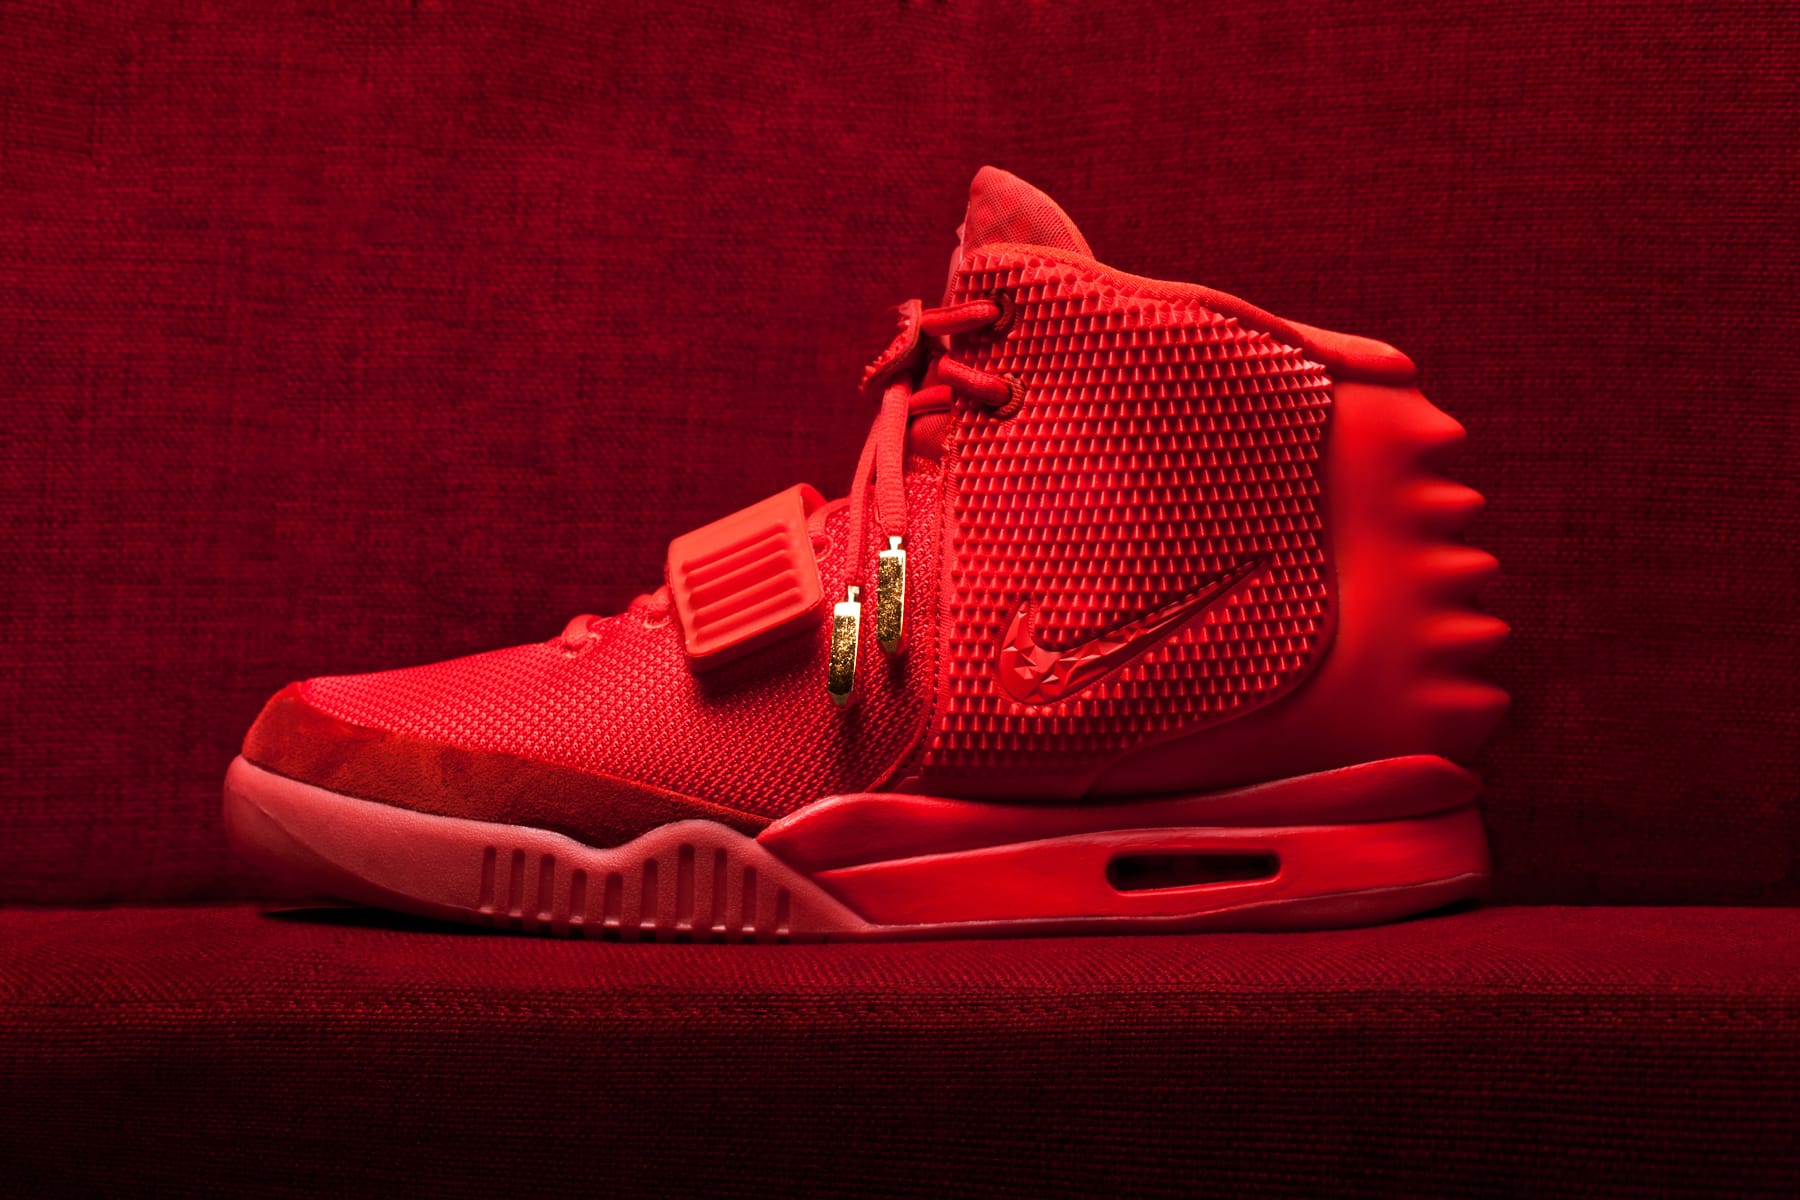 Reselling the Yeezy 2? Speculating 